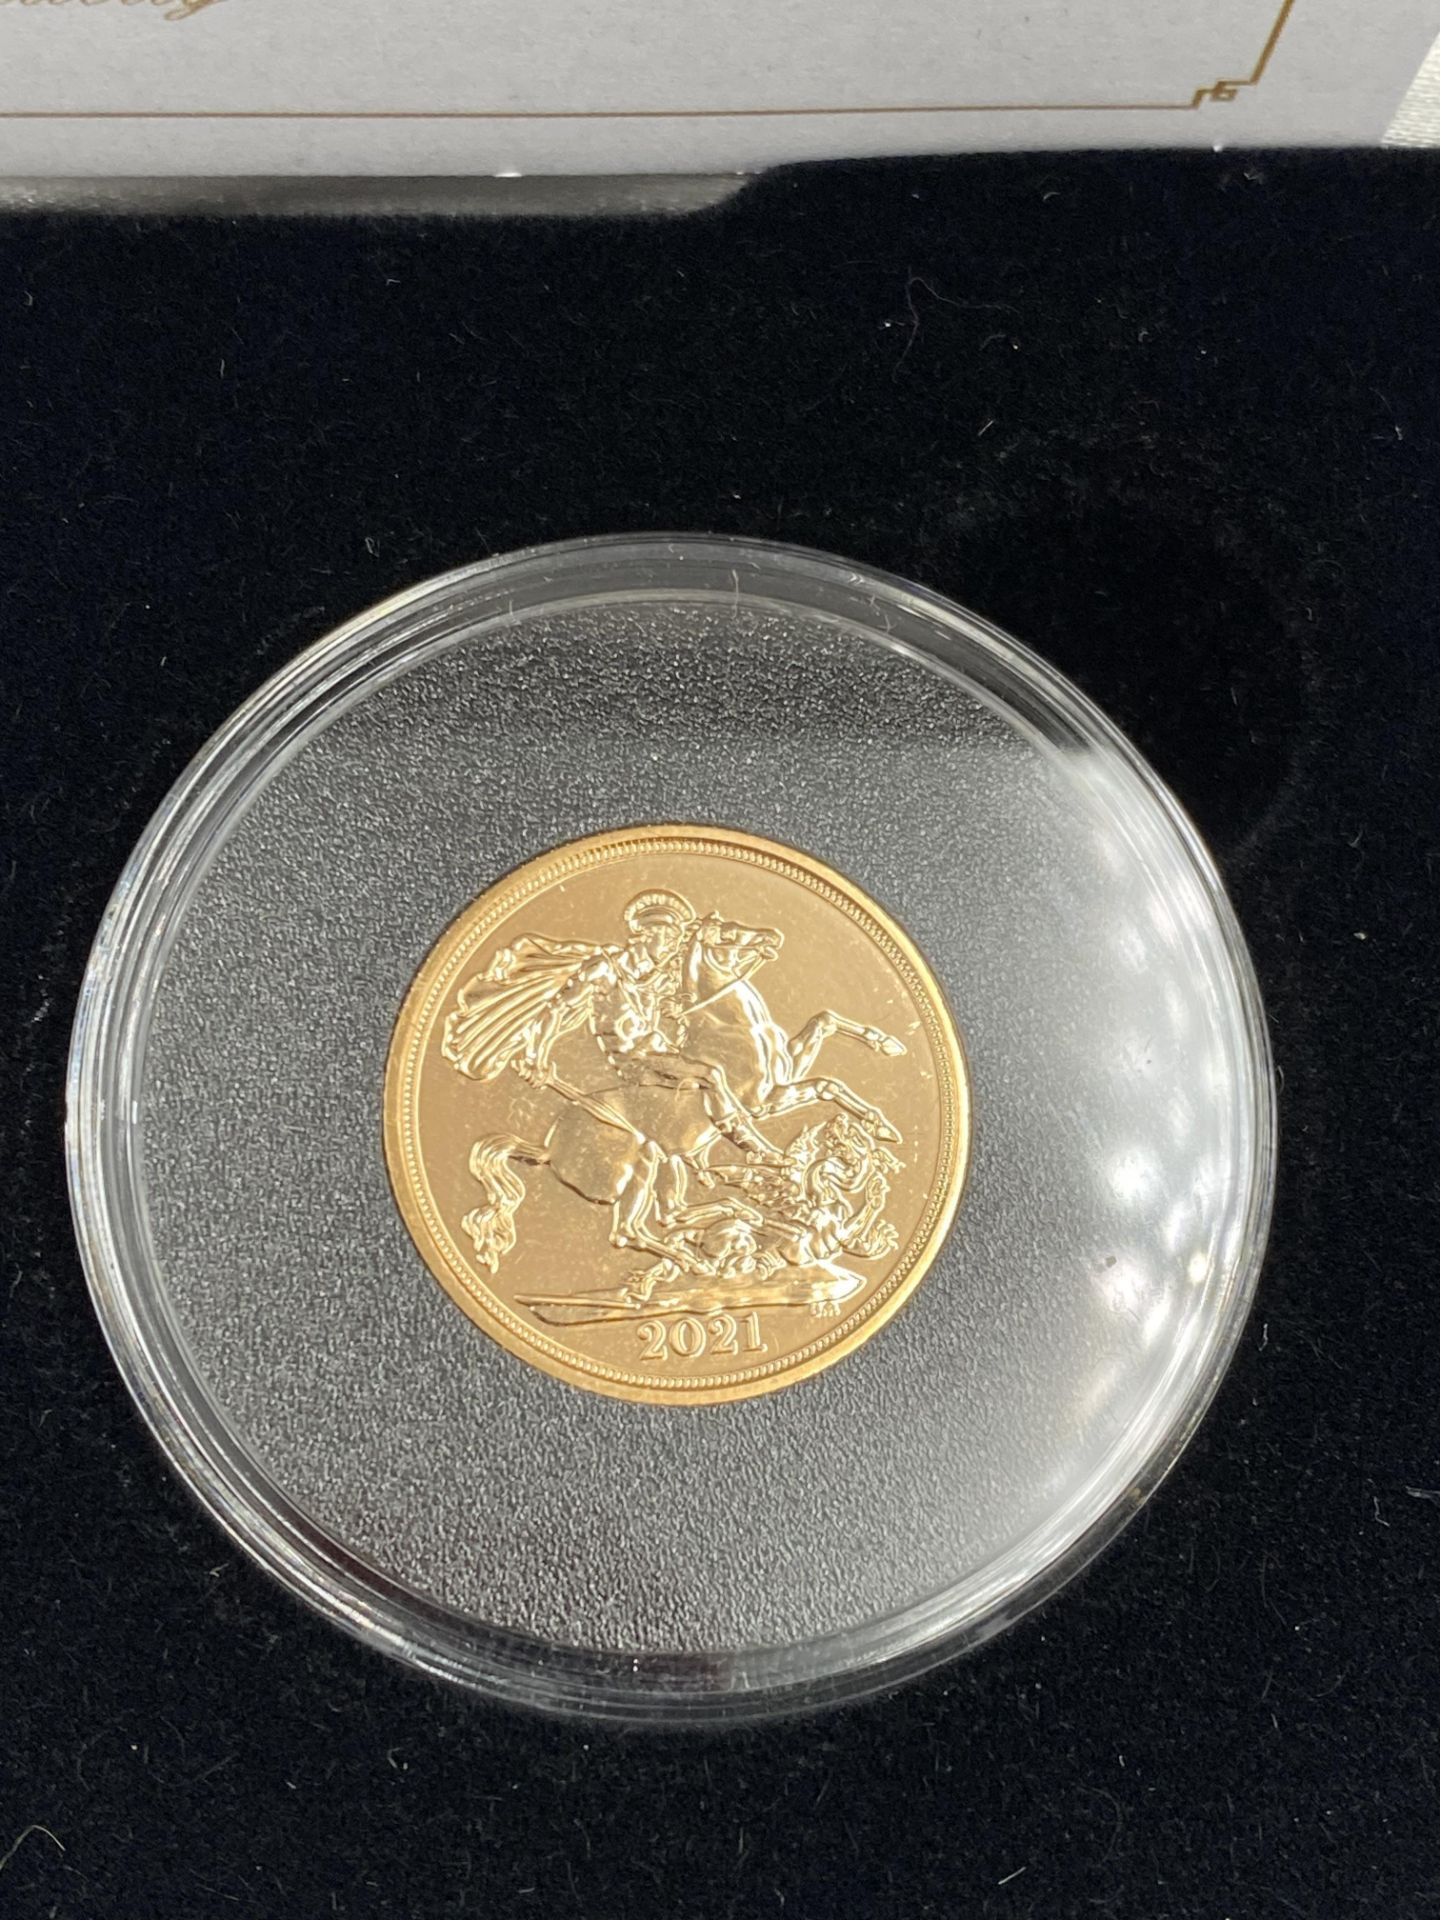 Jubilee Mint - Queen's 95th Birthday Gold Sovereign Pair - Image 5 of 5